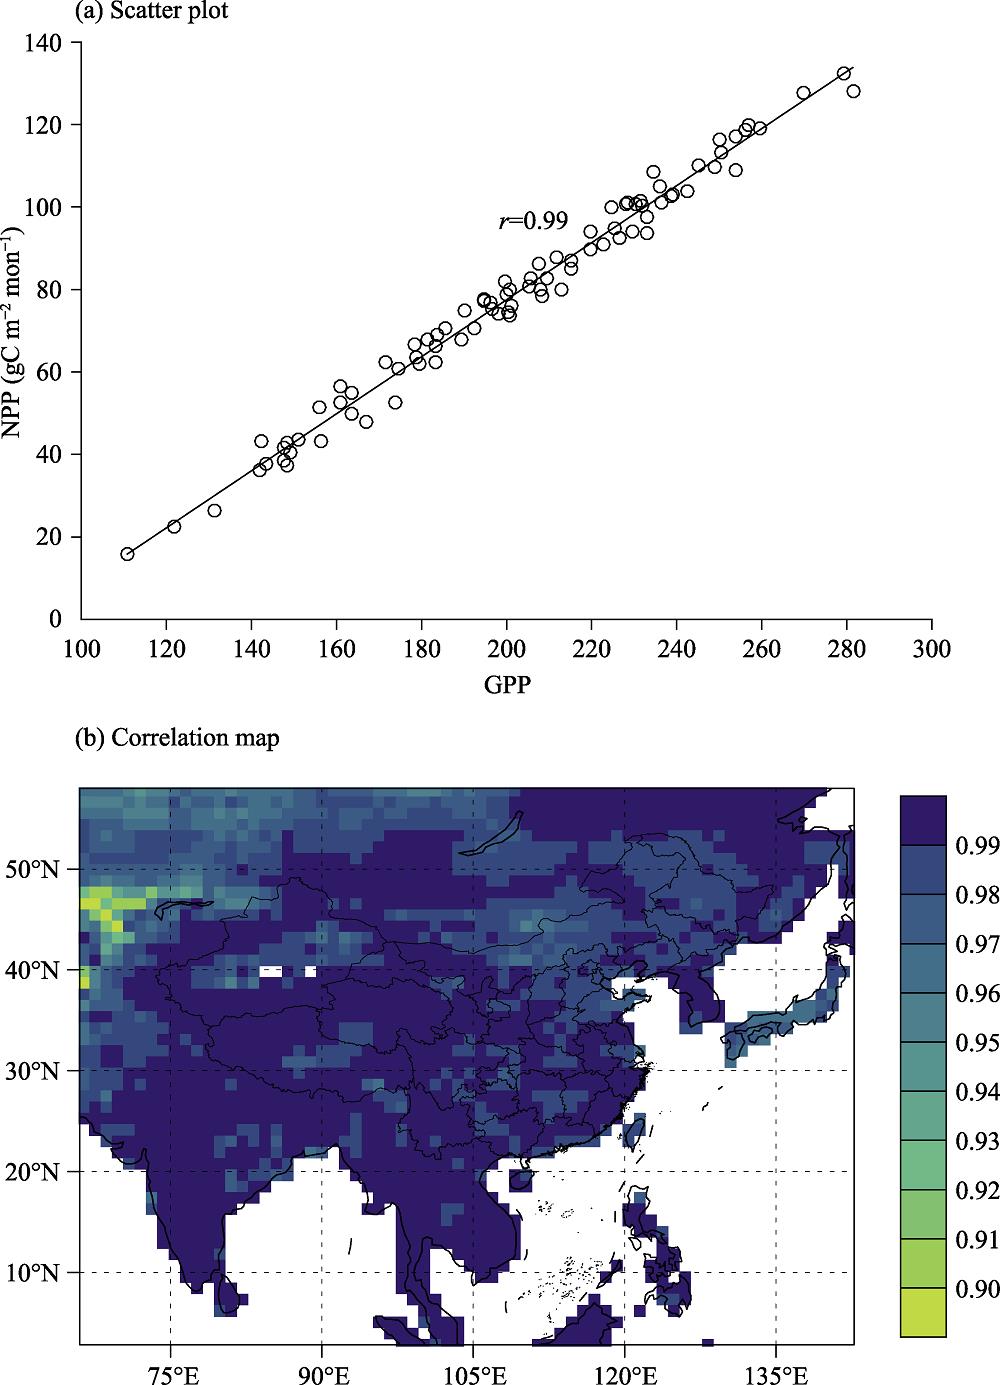 (a) Scatter plot between GPP and NPP from an example grid cell in June from 2015-2100 (The line is the linear fit. r represents the correlation coefficient.); (b) Correlation coefficient distribution between GPP and NPP in June from 2015-2100 (Grids shown are all significant at the 0.05 level.)